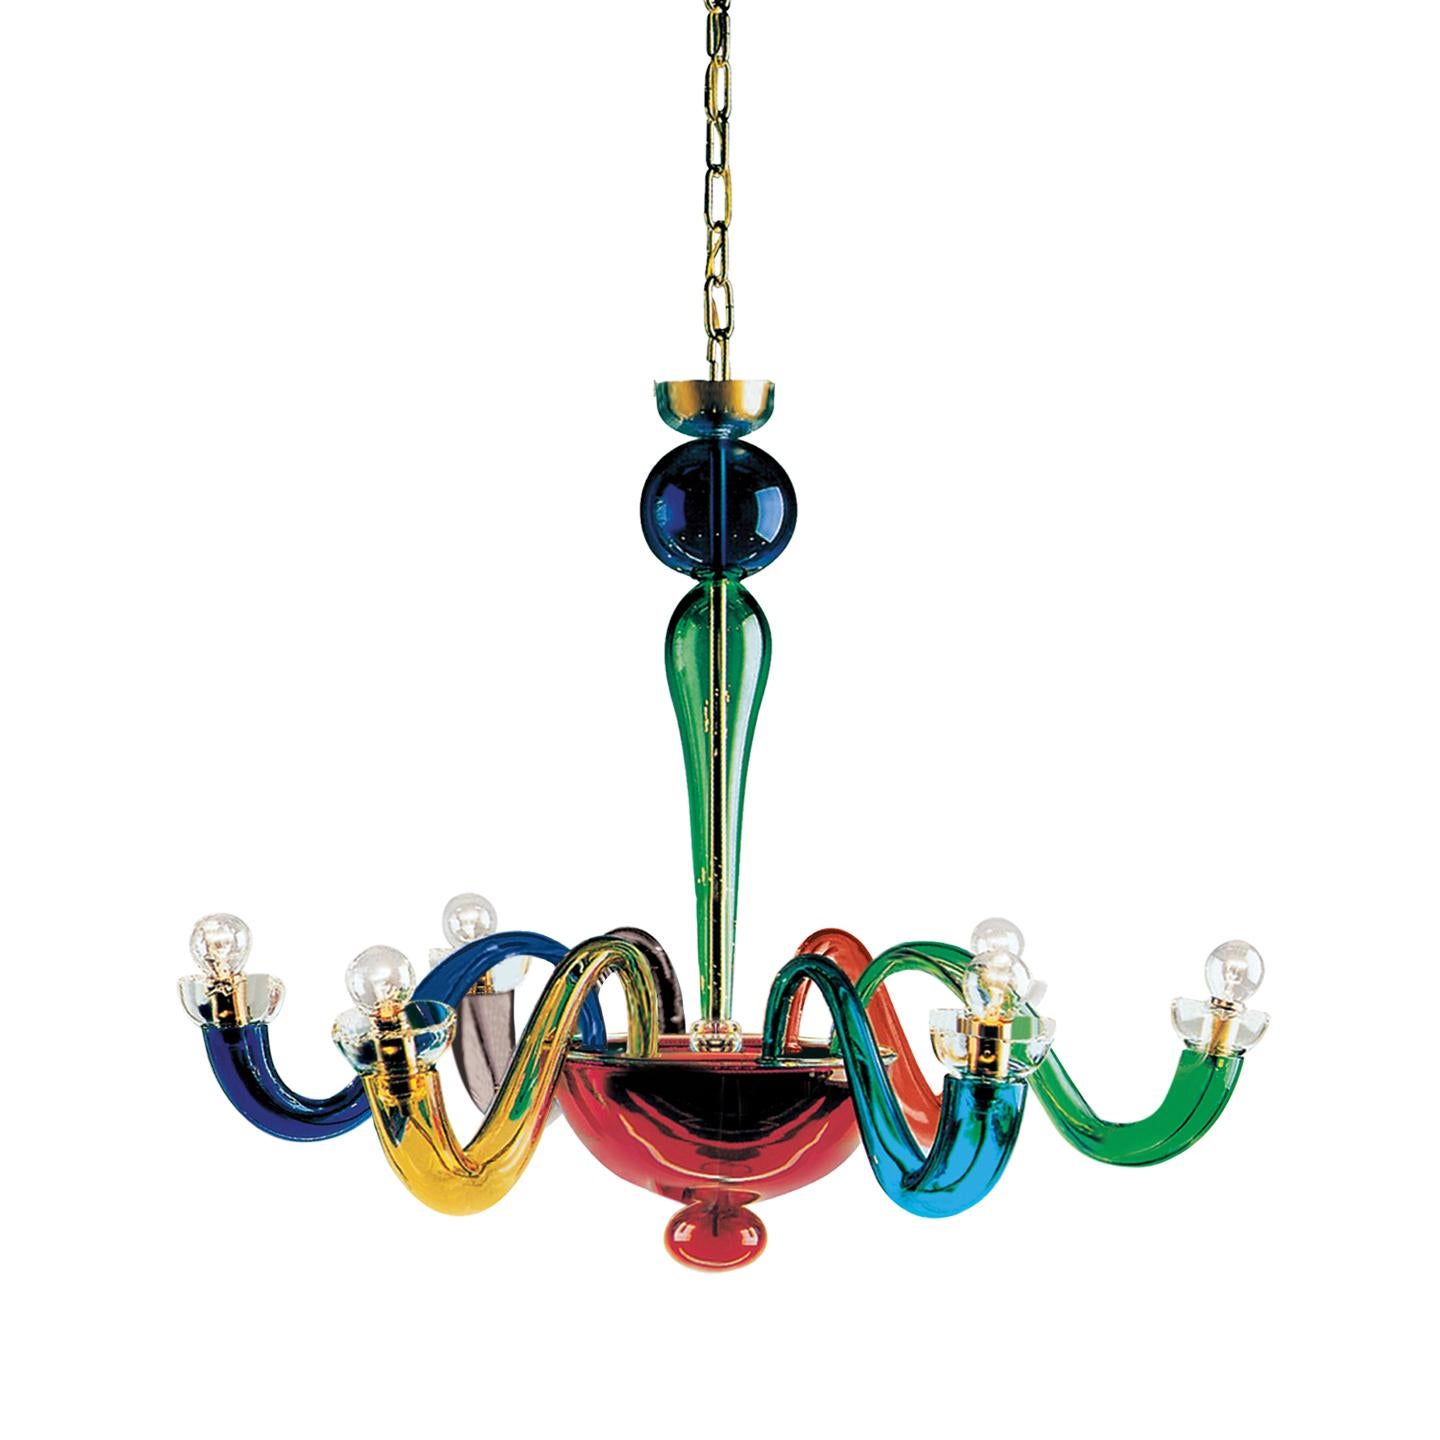 Leucos Serenisima L 6 Chandelier in Multicolor and Gold by Archivio Storico For Sale